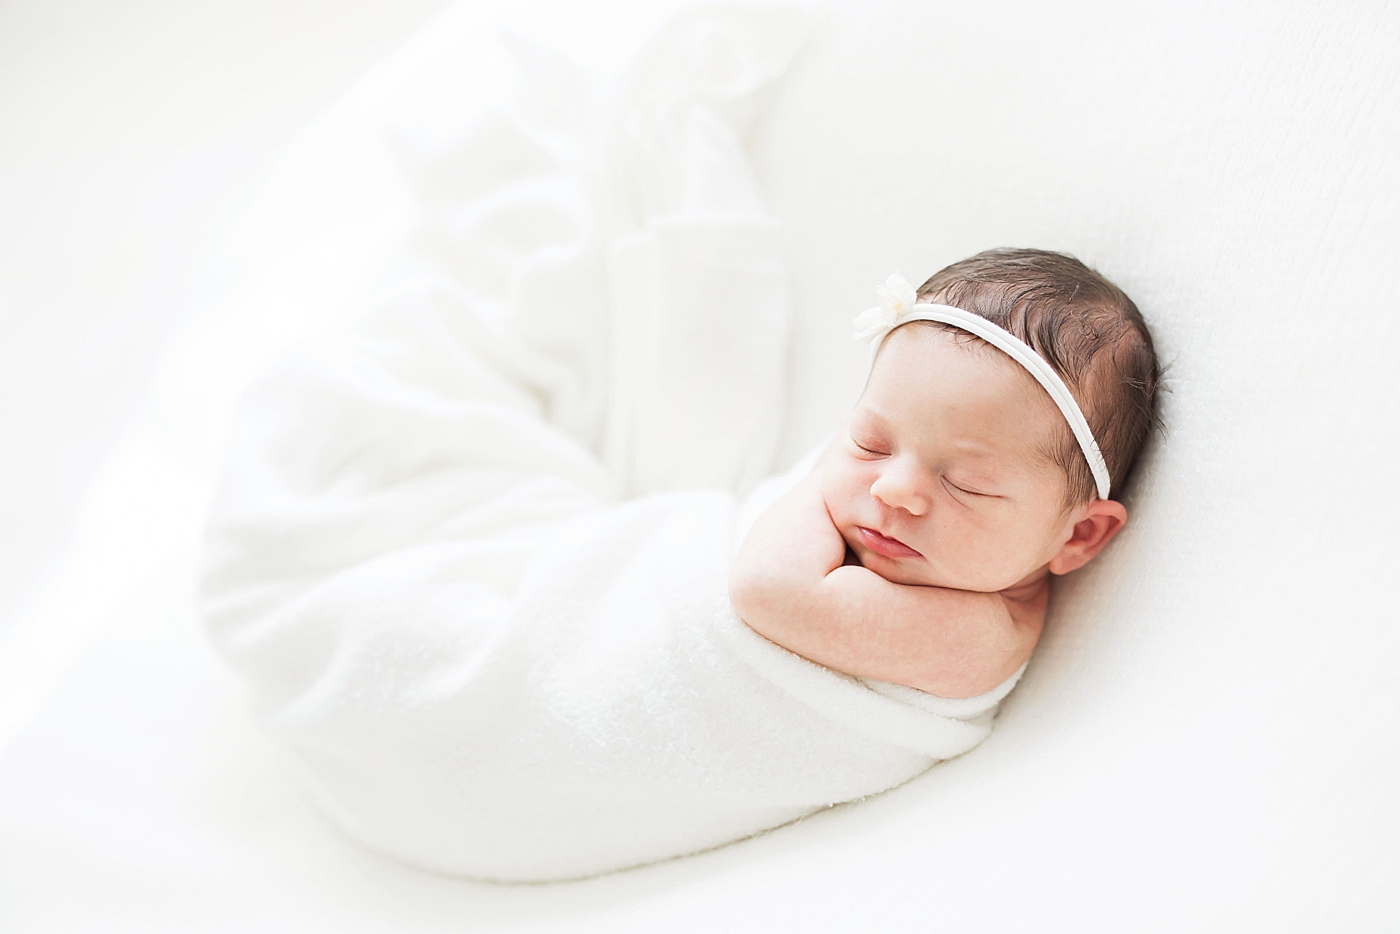 Newborn session for baby girl in studio in Houston Heights. Photo by Fresh Light Photography.